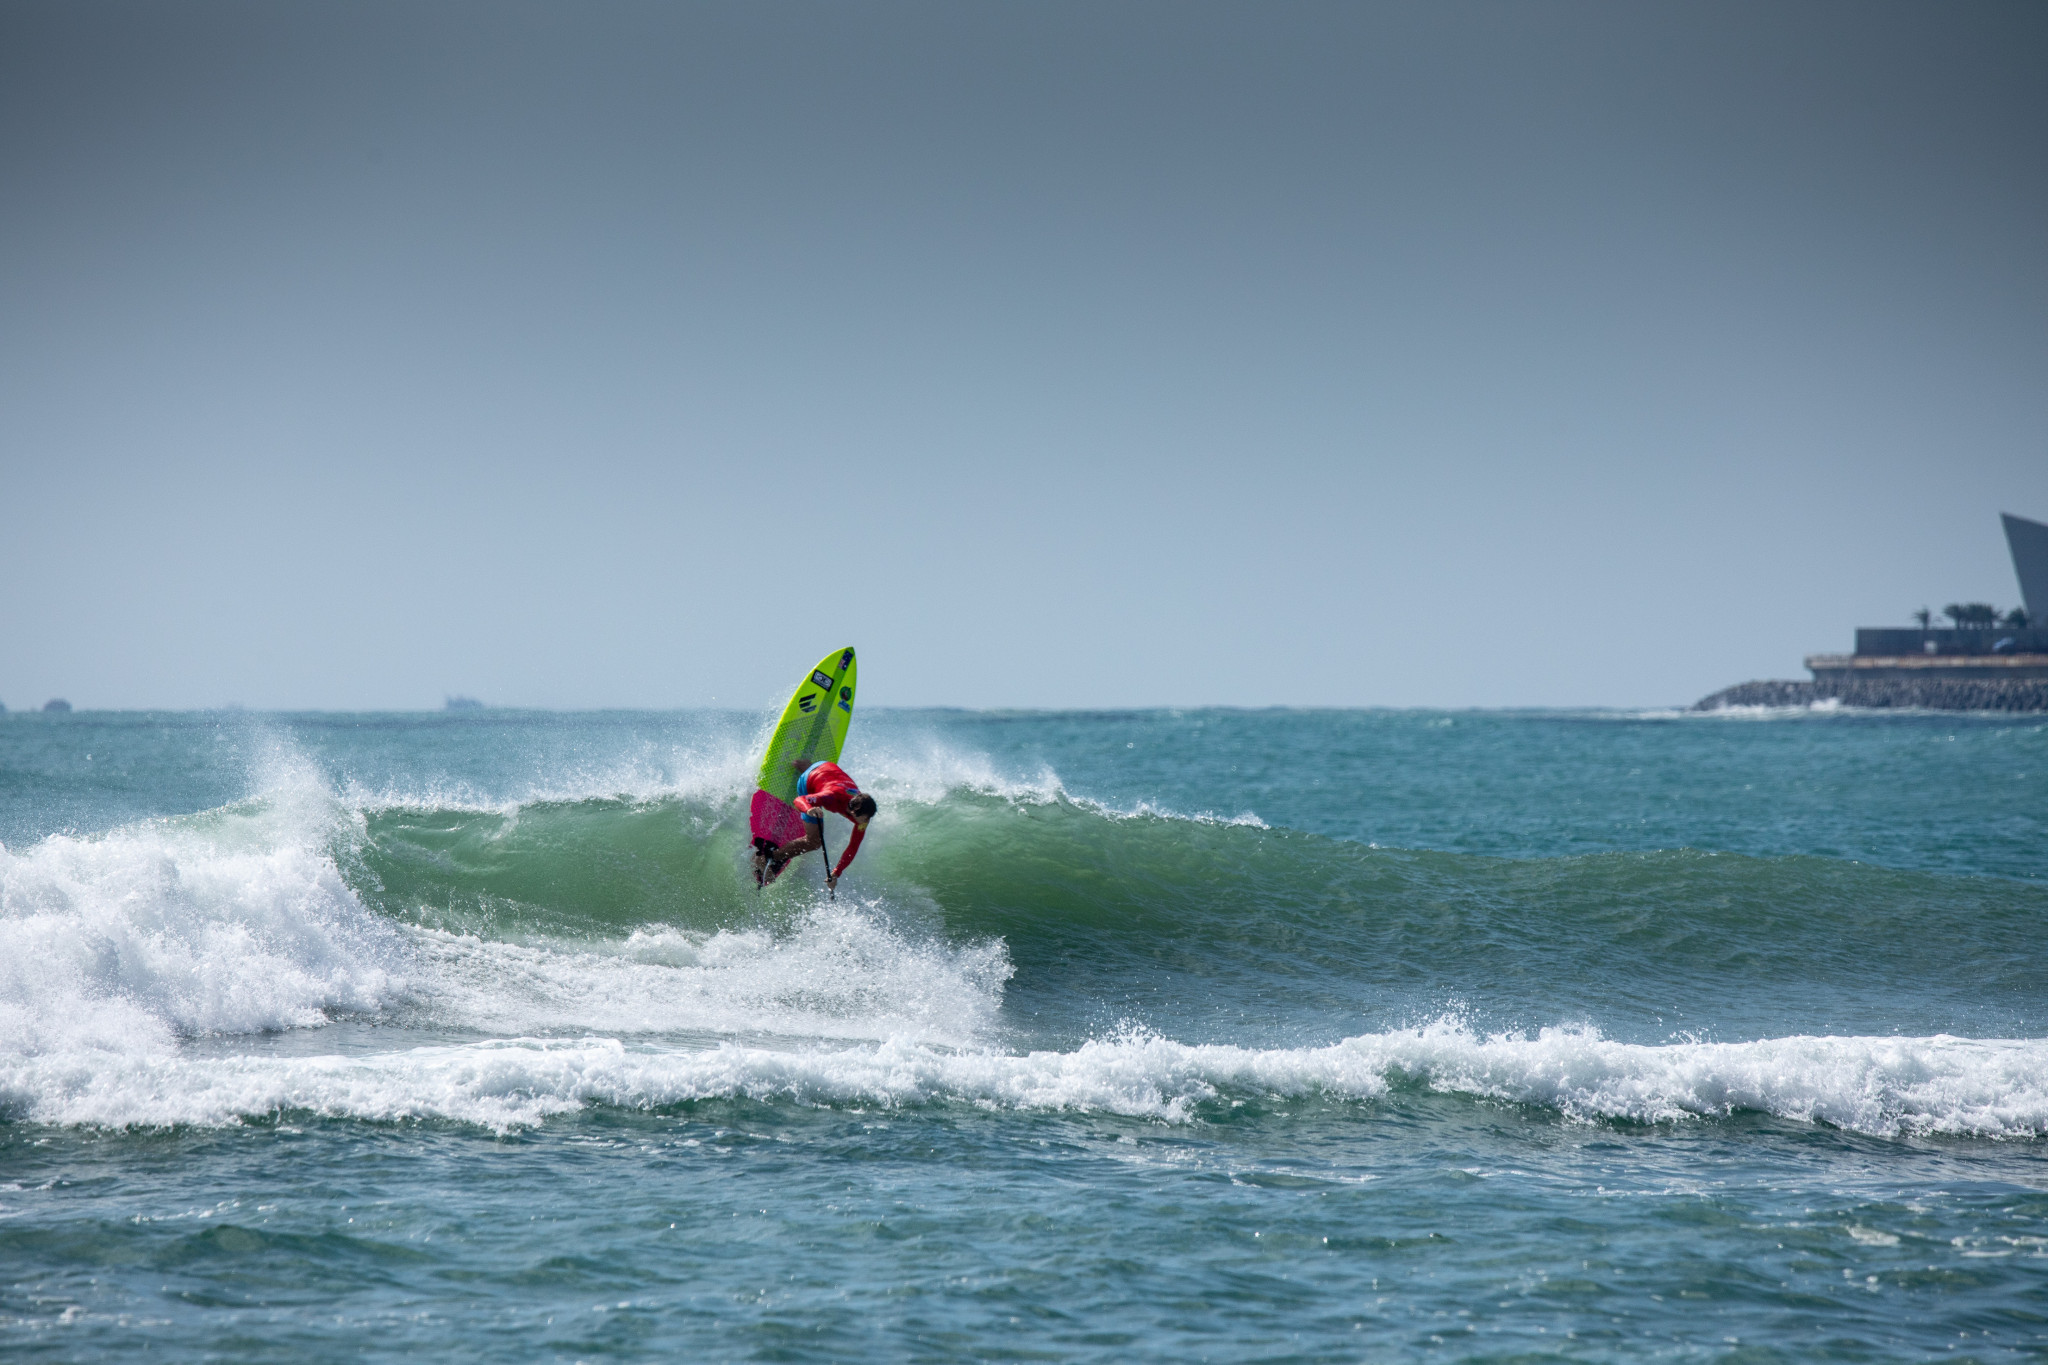 Australia's Harry Maskell set the highest wave score of the event so far today, at 9.5 out of 10, at the World SUP and Paddleboard Championship World SUP and Paddleboard Championship ©ISA